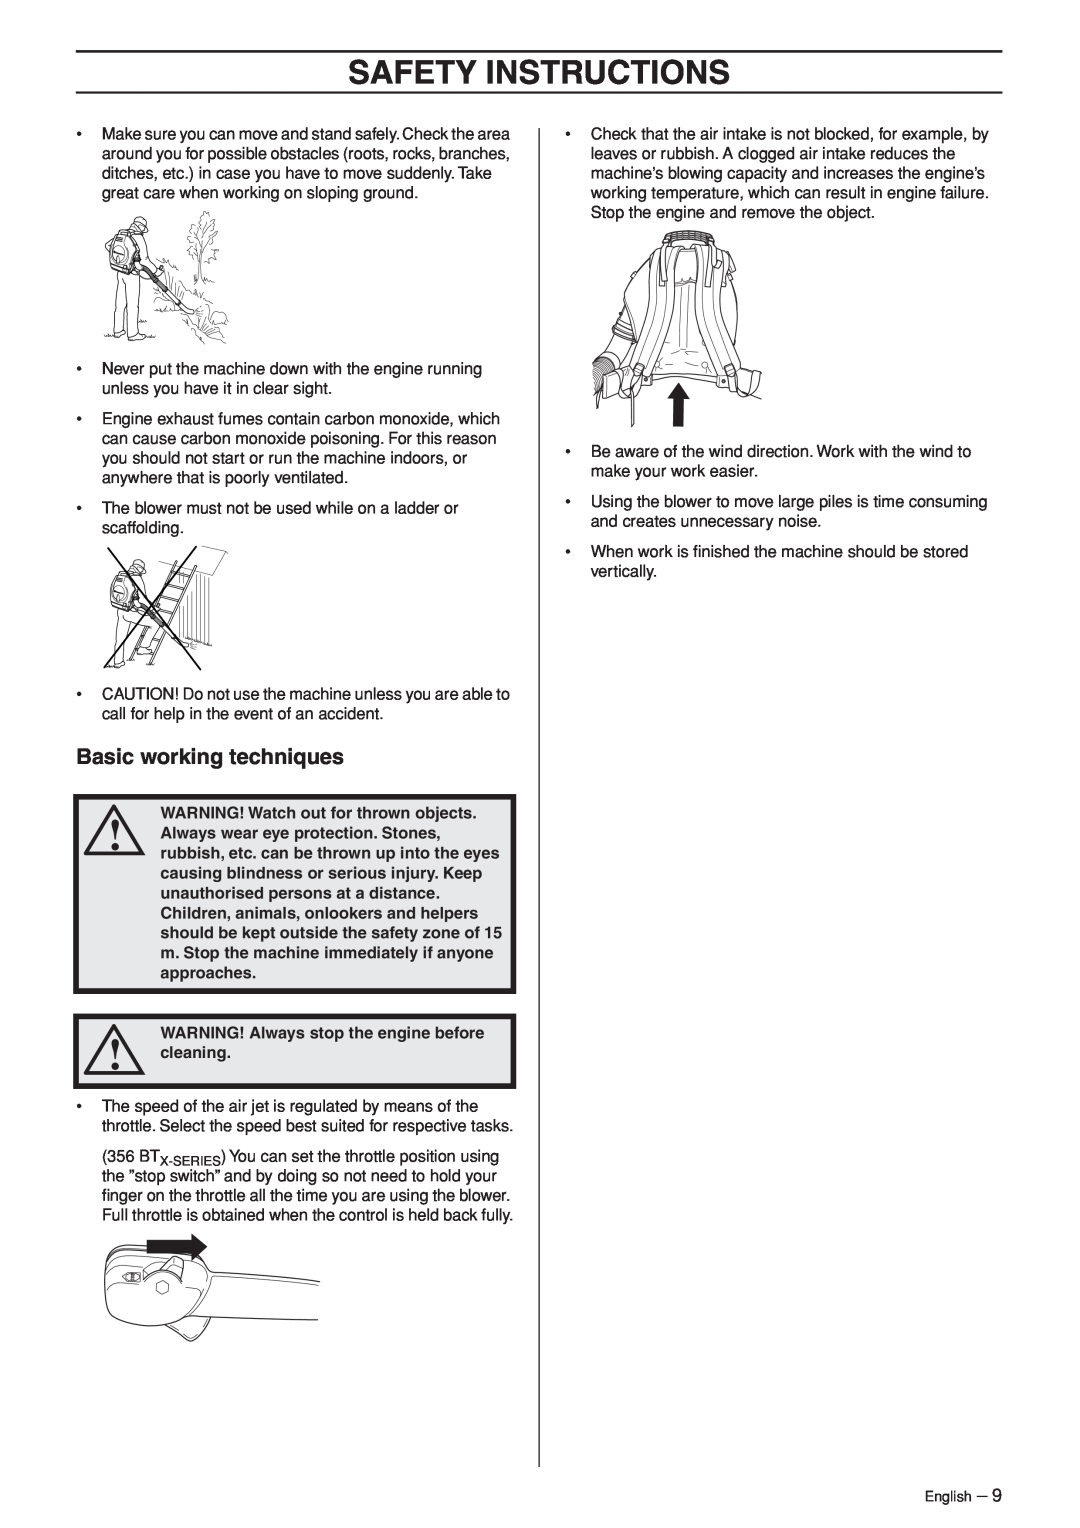 Husqvarna 953210103 manual Safety Instructions, Basic working techniques, WARNING! Watch out for thrown objects 